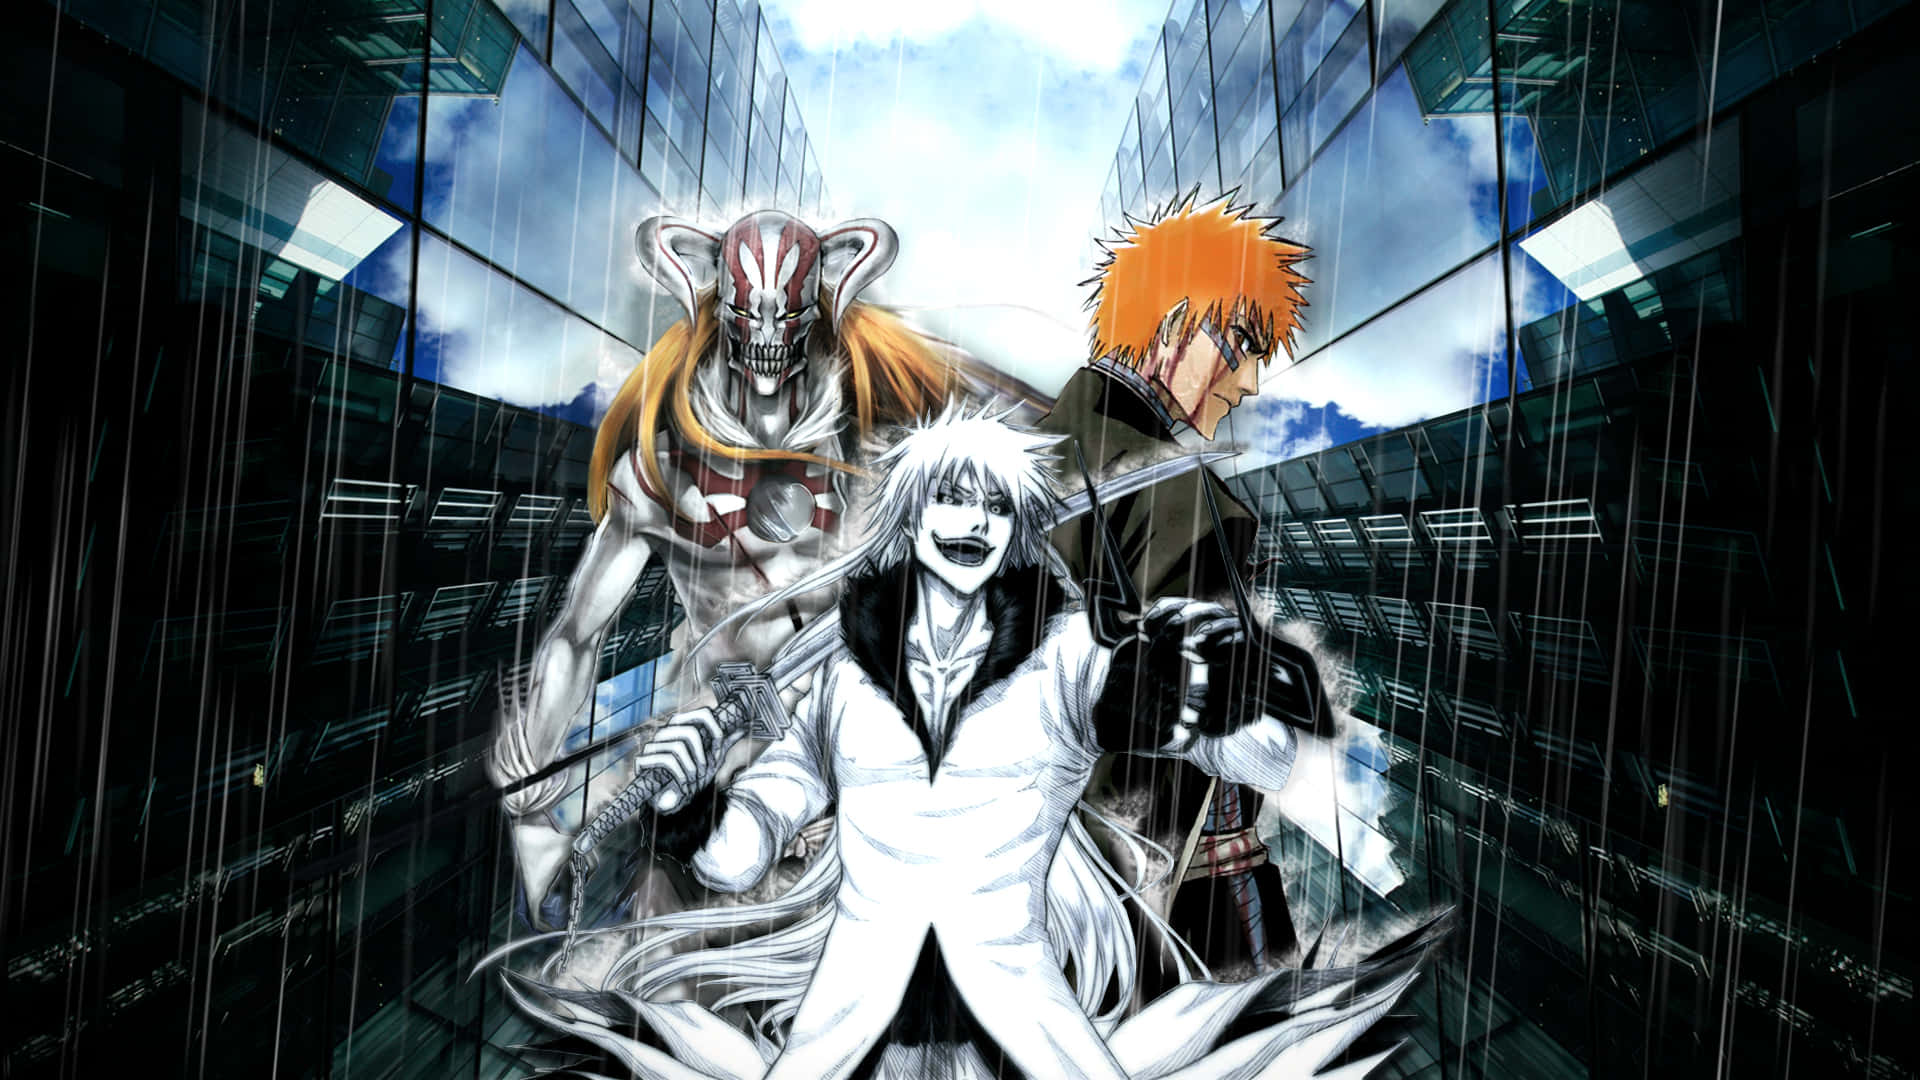 Bleach - A Group Of Anime Characters Standing In A City Wallpaper